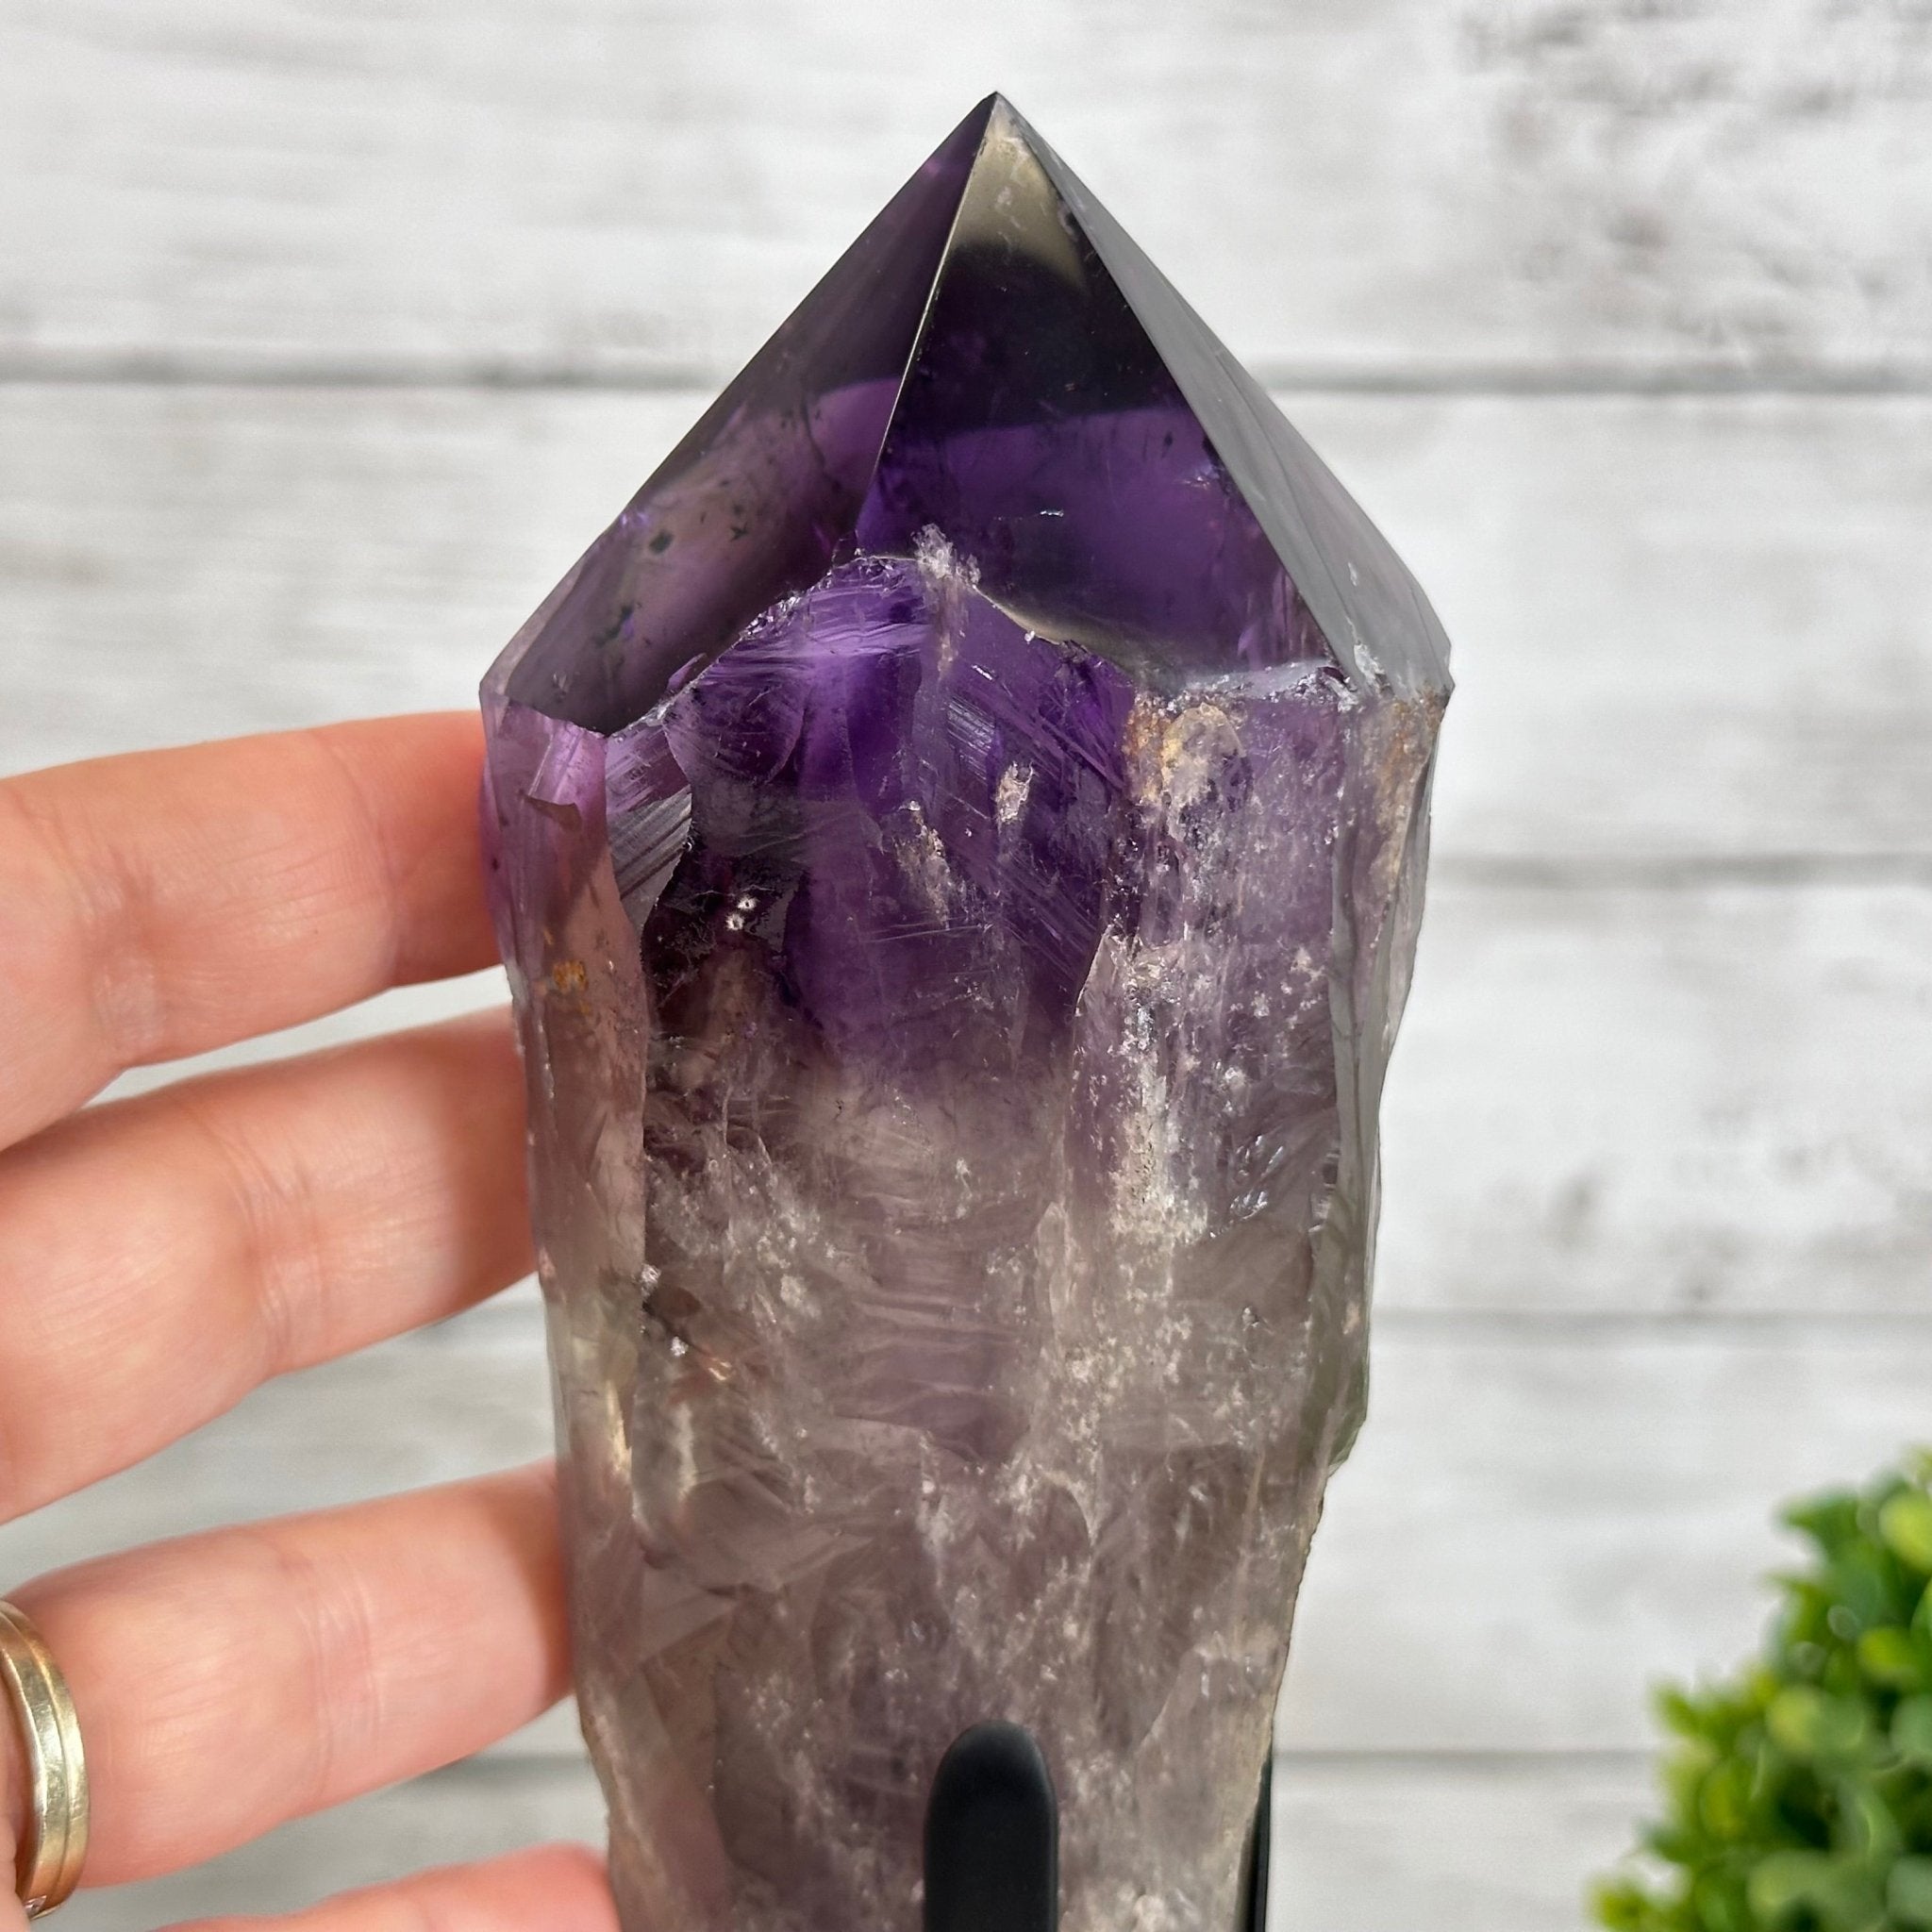 Super Quality Amethyst Wand on a Metal Stand, 1.9 lbs & 10.8" Tall #3123AM-004 - Brazil GemsBrazil GemsSuper Quality Amethyst Wand on a Metal Stand, 1.9 lbs & 10.8" Tall #3123AM-004Clusters on Fixed Bases3123AM-004